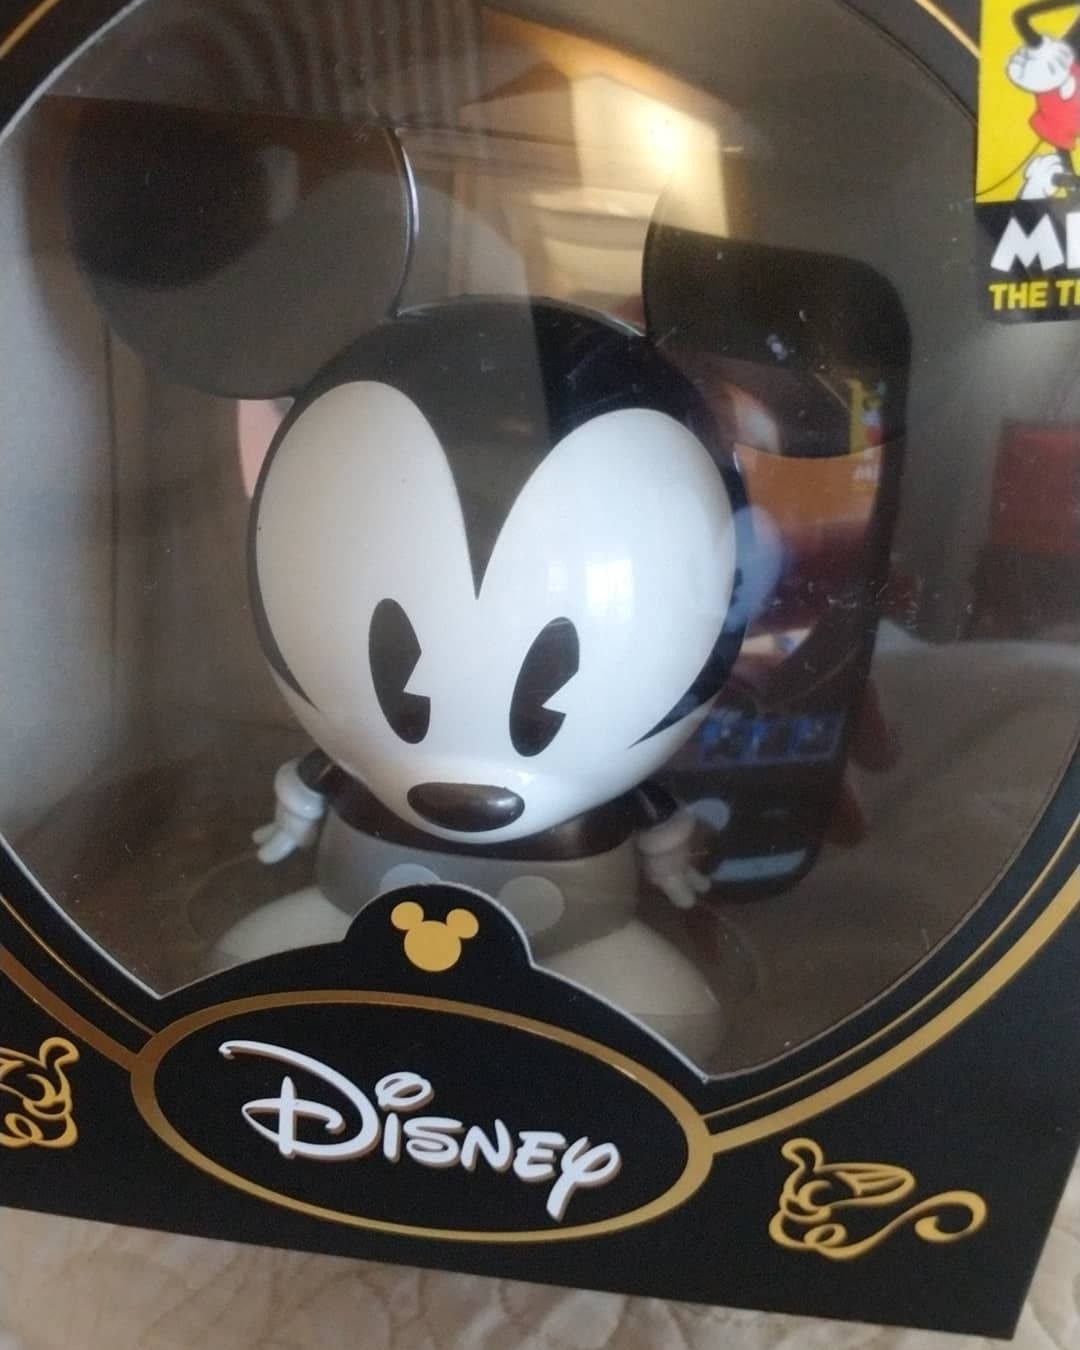 Disney Mickey Mouse exclusive limited edition figure